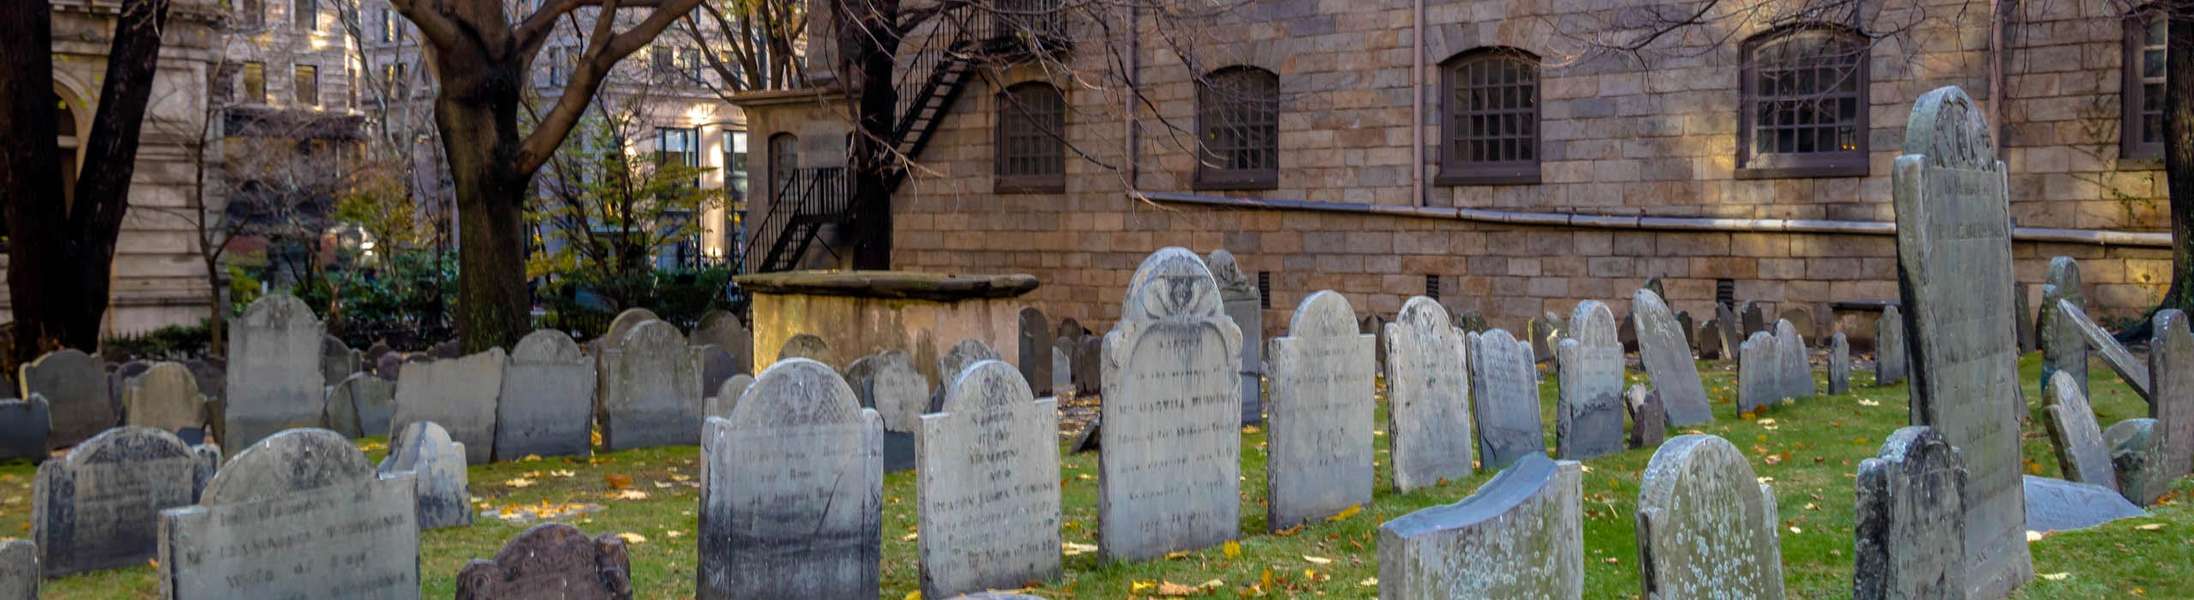 The haunted King's Chapel Burying Grounds, one of the stops on our Boston Ghost Tours